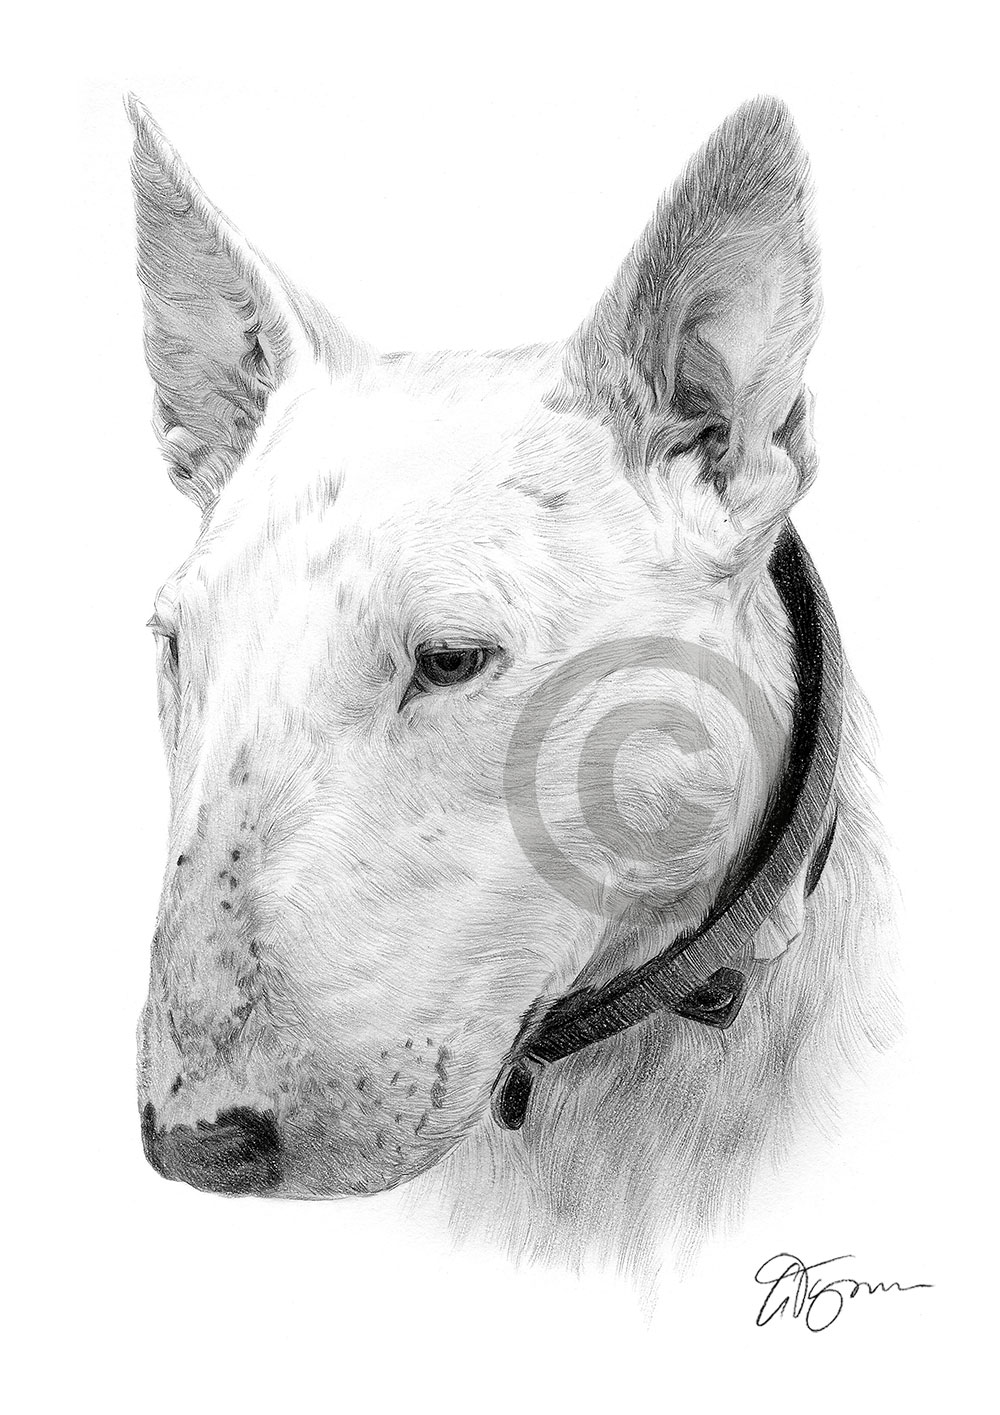 Pencil drawing of an english bull terrier by artist Gary Tymon